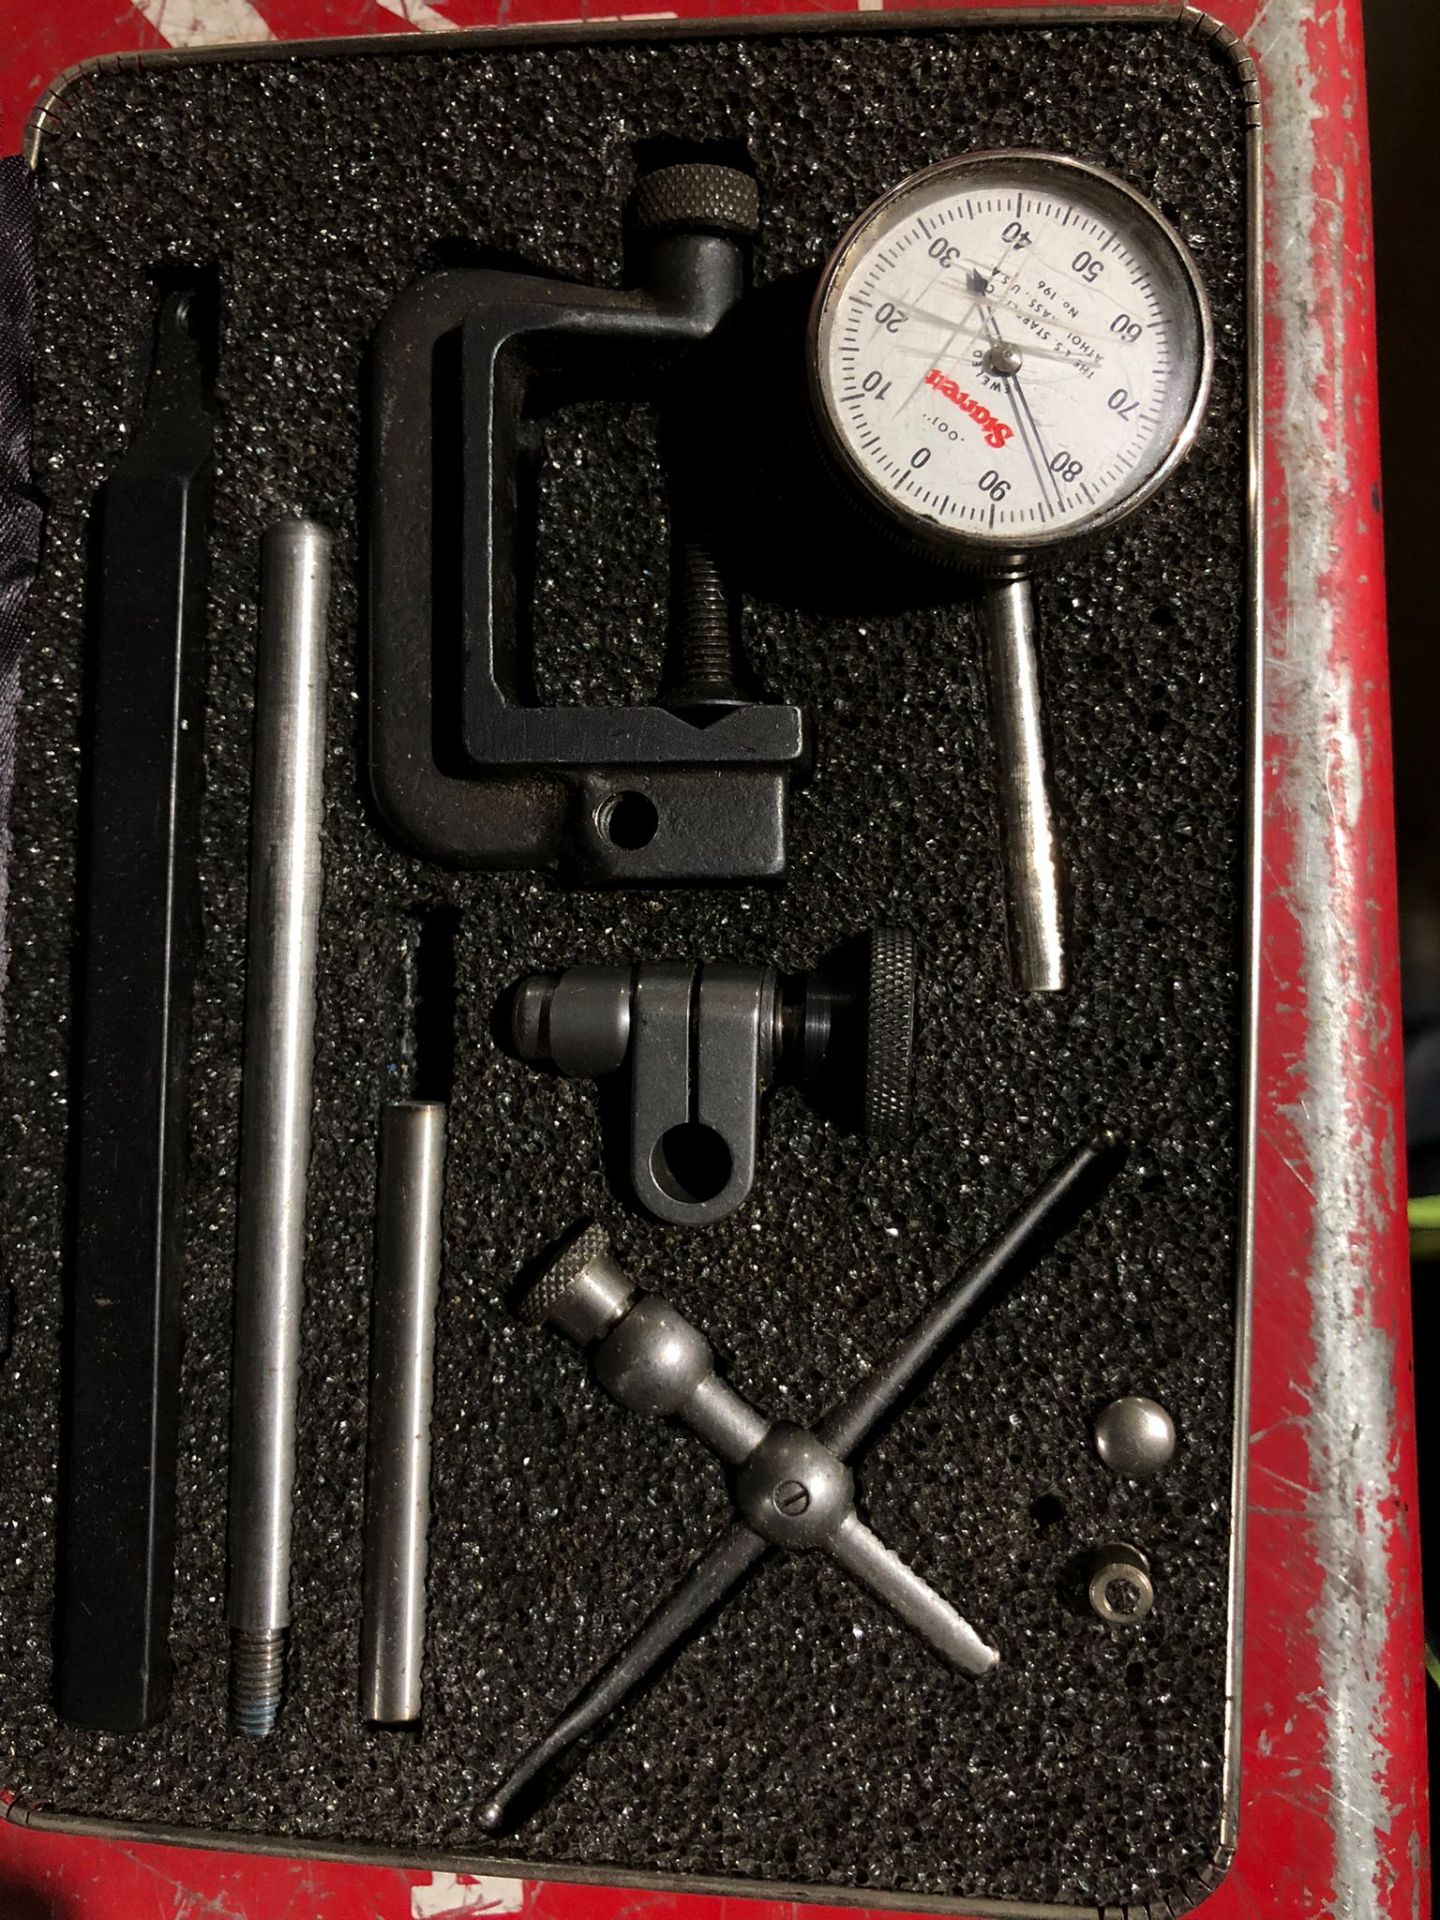 Starrett Dial Test Indicator with stand attachments - Image 2 of 2